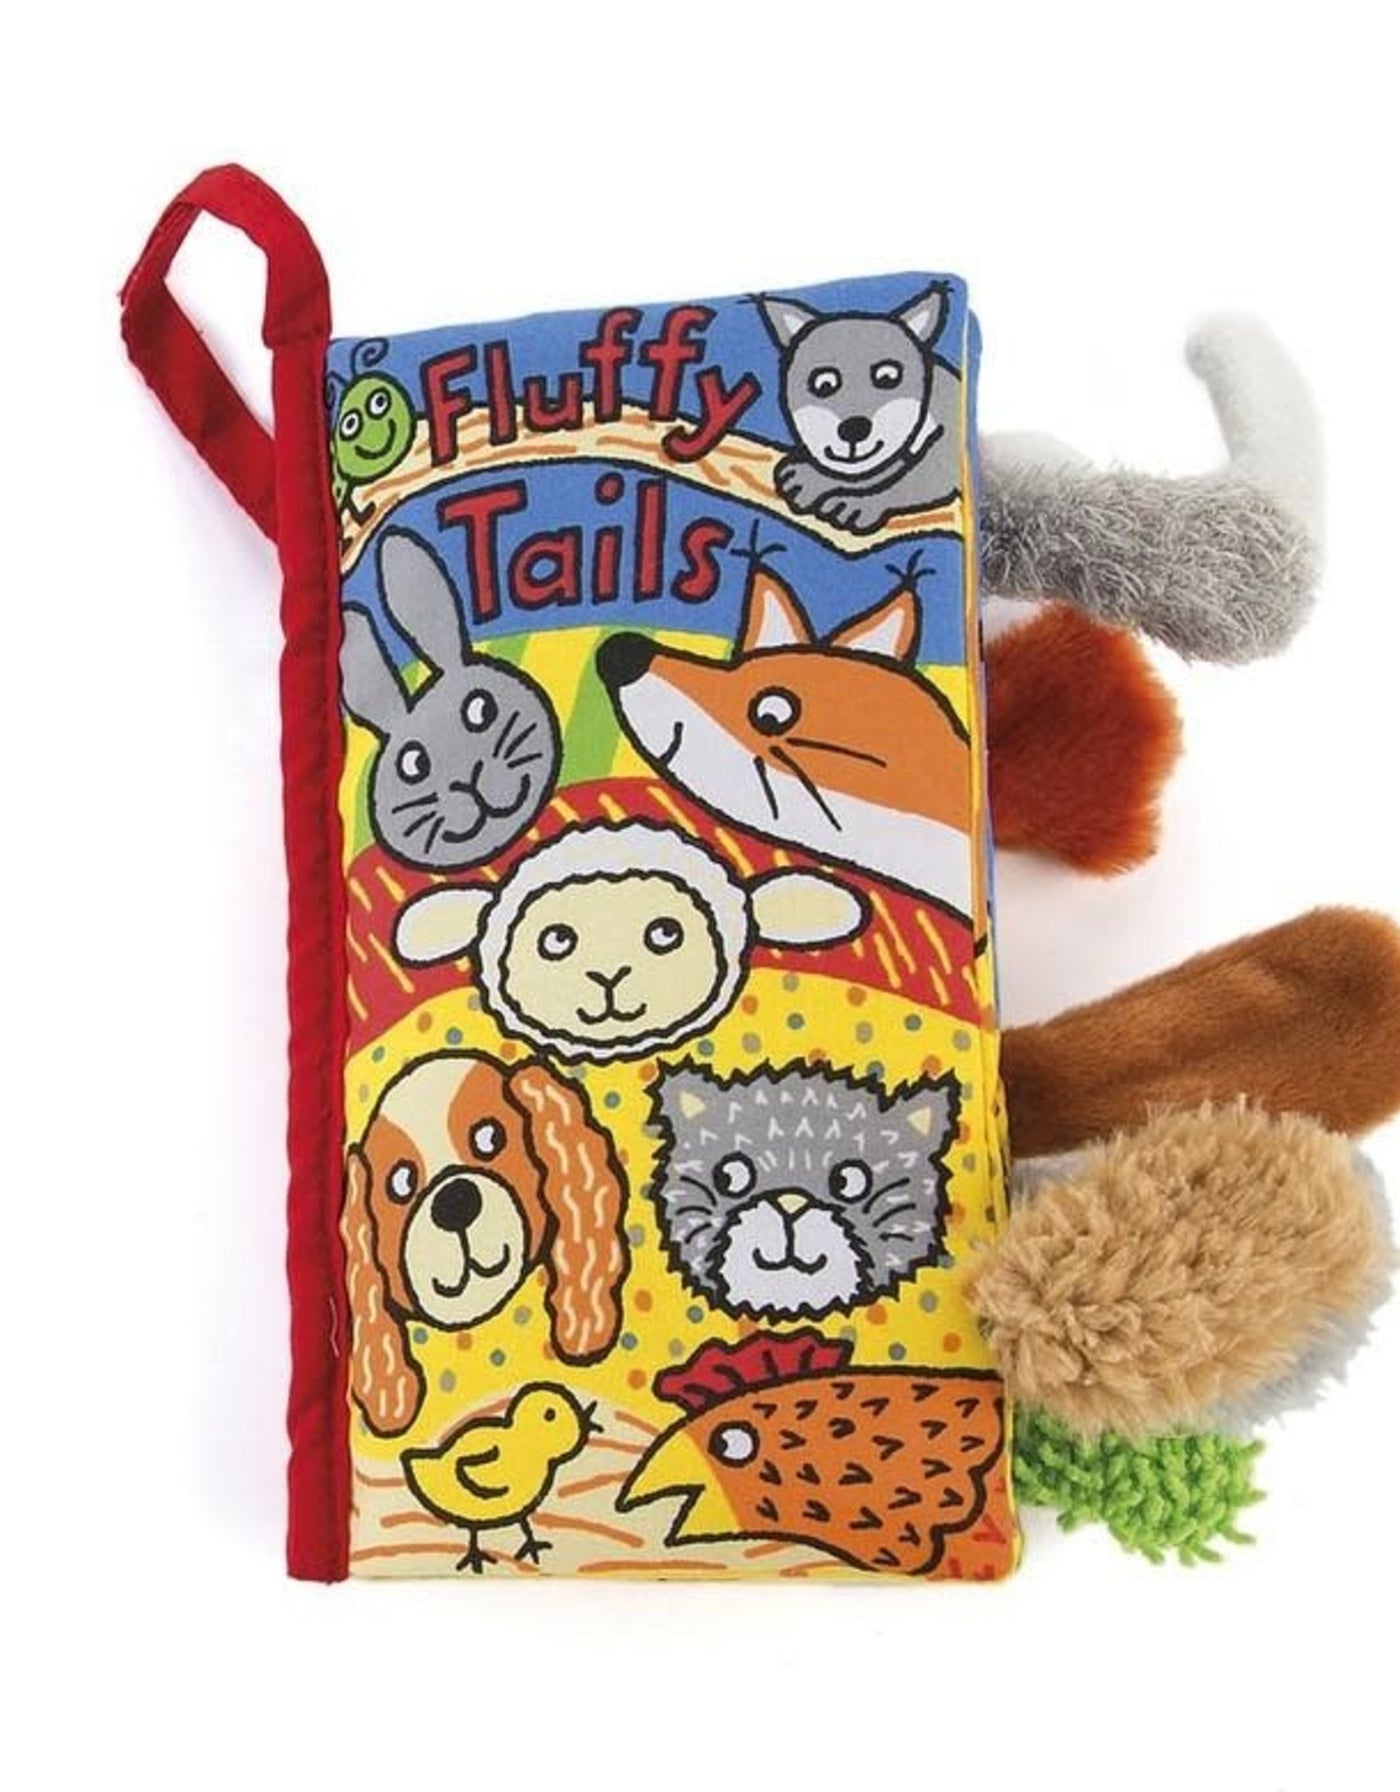 Fluffy tail activity book